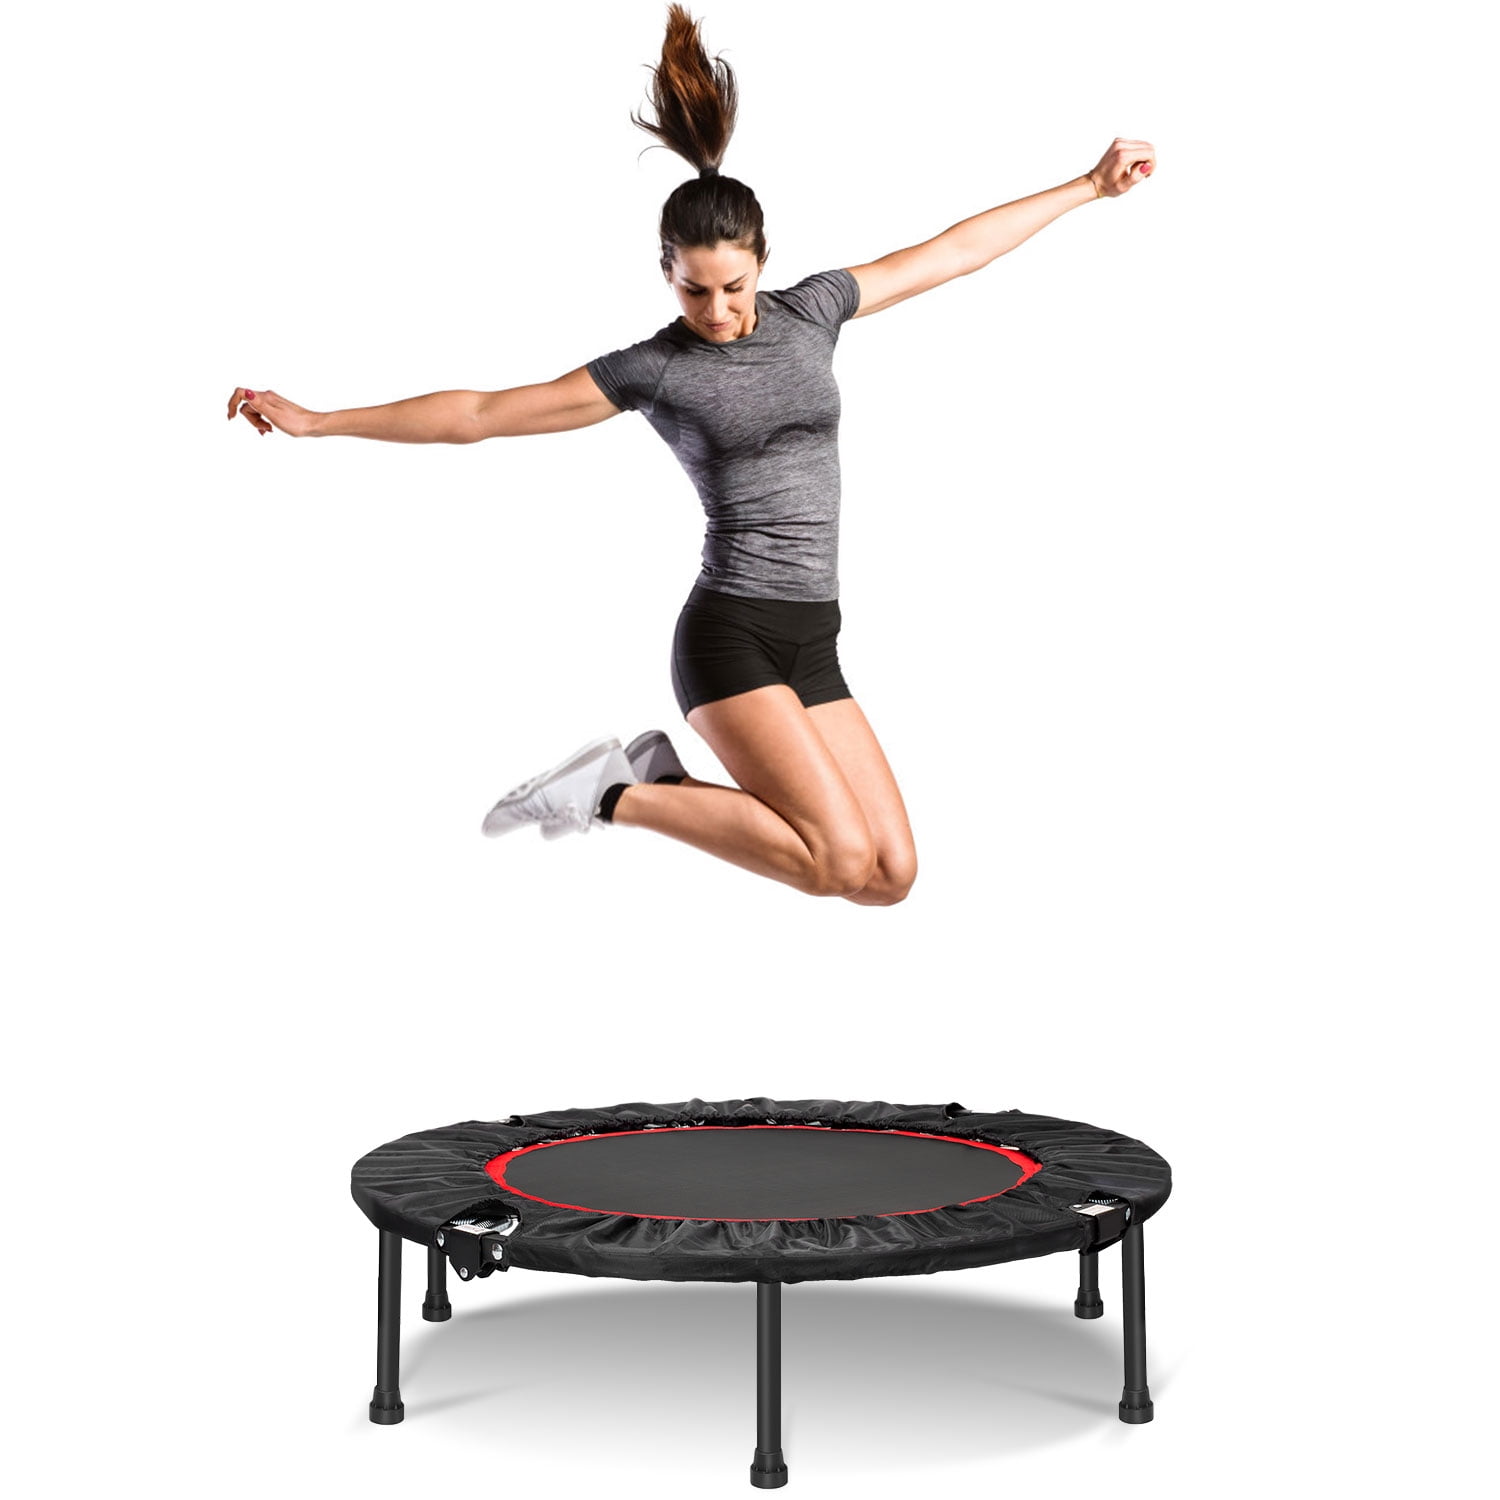 40" Mini Trampoline Rebounder Safety Net Pad Exercise Fitness Gym Home 330lbs 